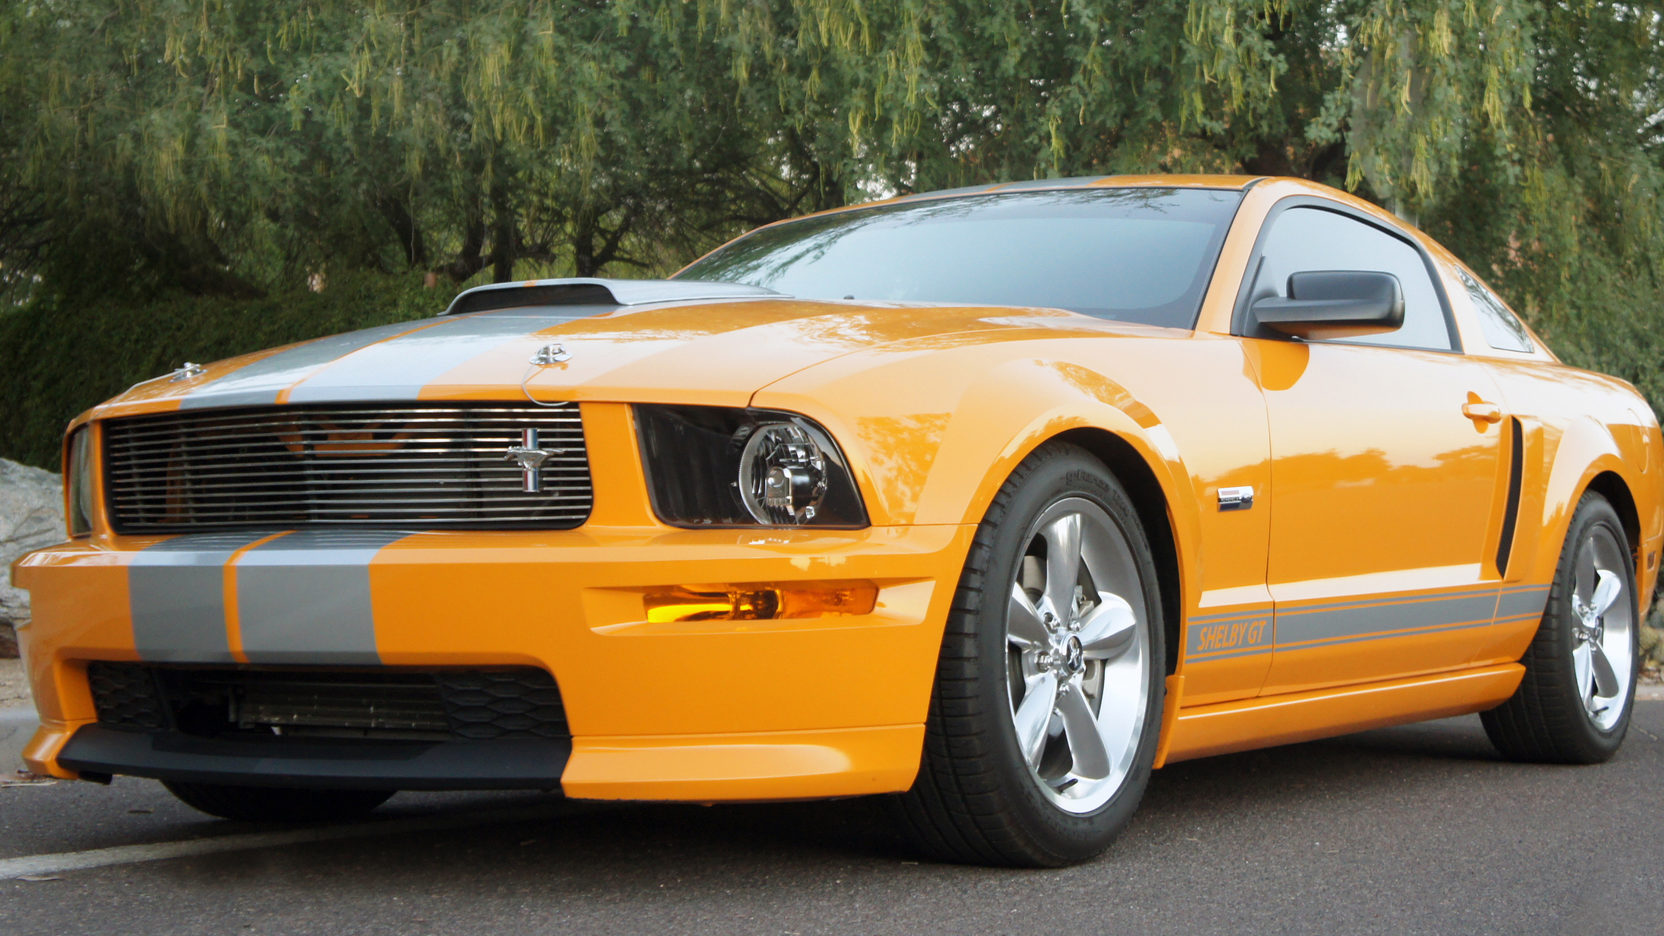 2008 Ford Mustang Shelby GT-C